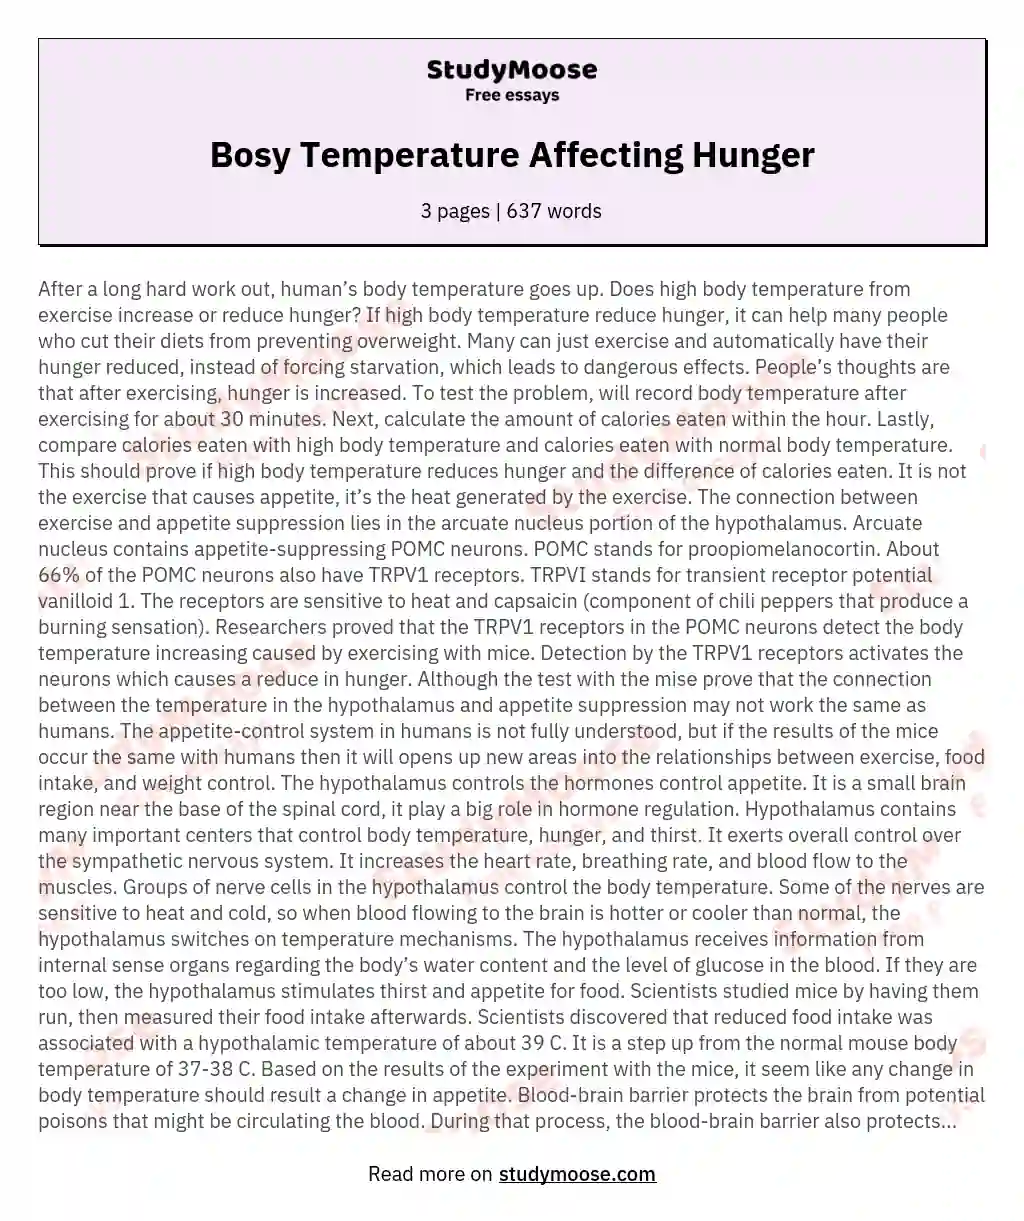 Bosy Temperature Affecting Hunger essay